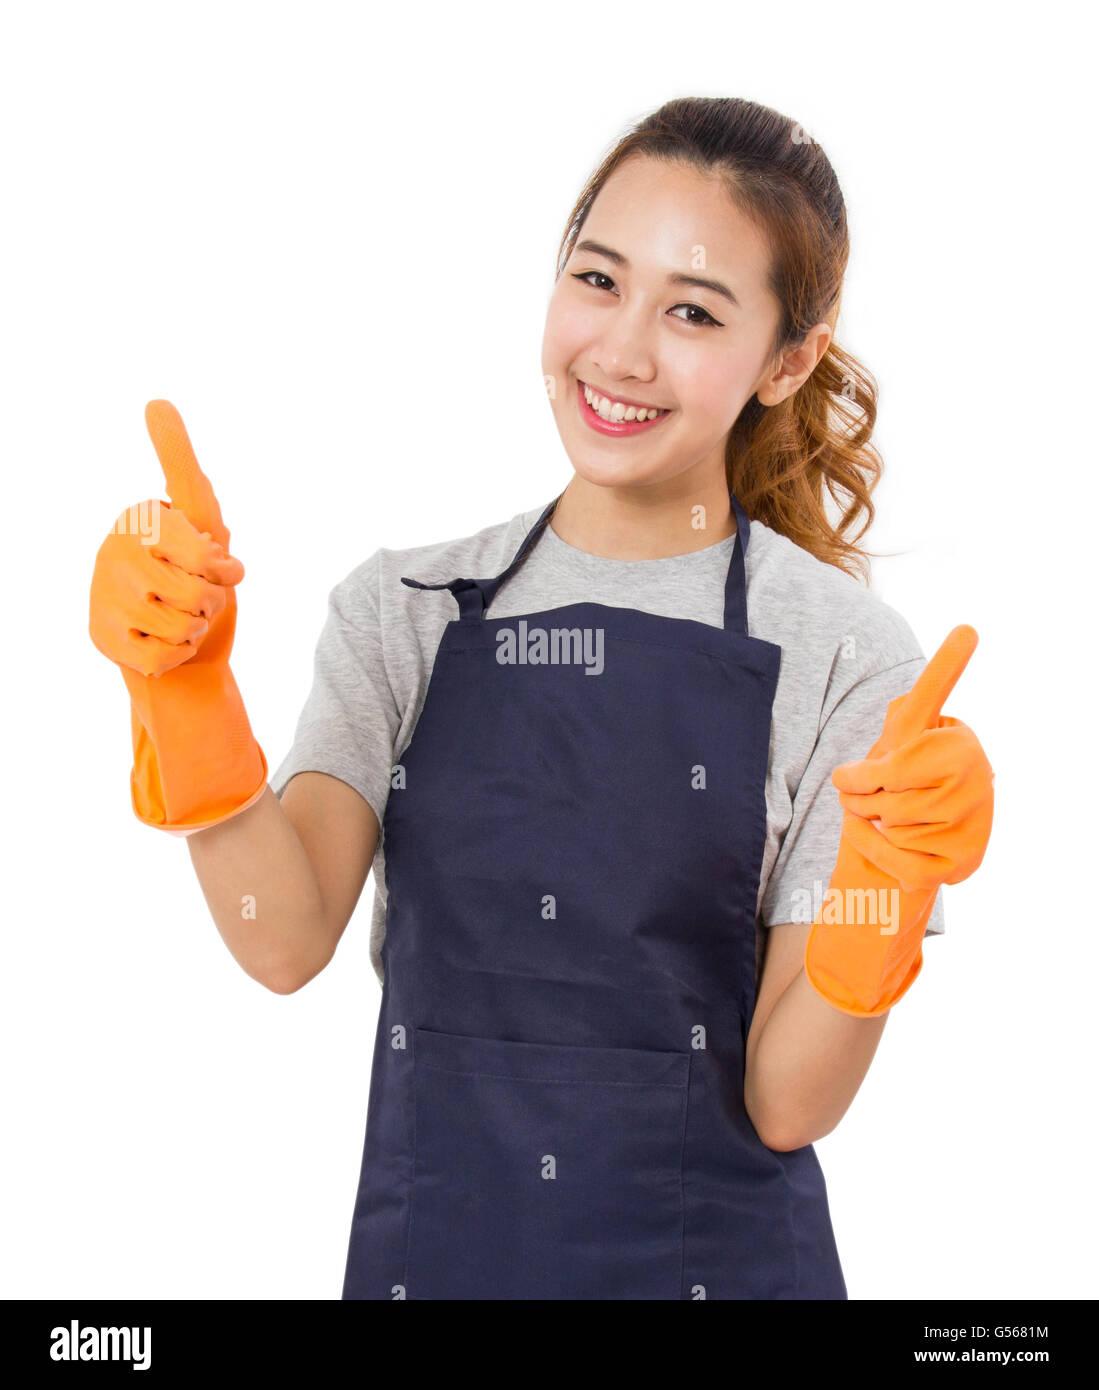 Smiling Asian Woman Wearing Rubber Gloves Giving Thumbs Up On a White ...